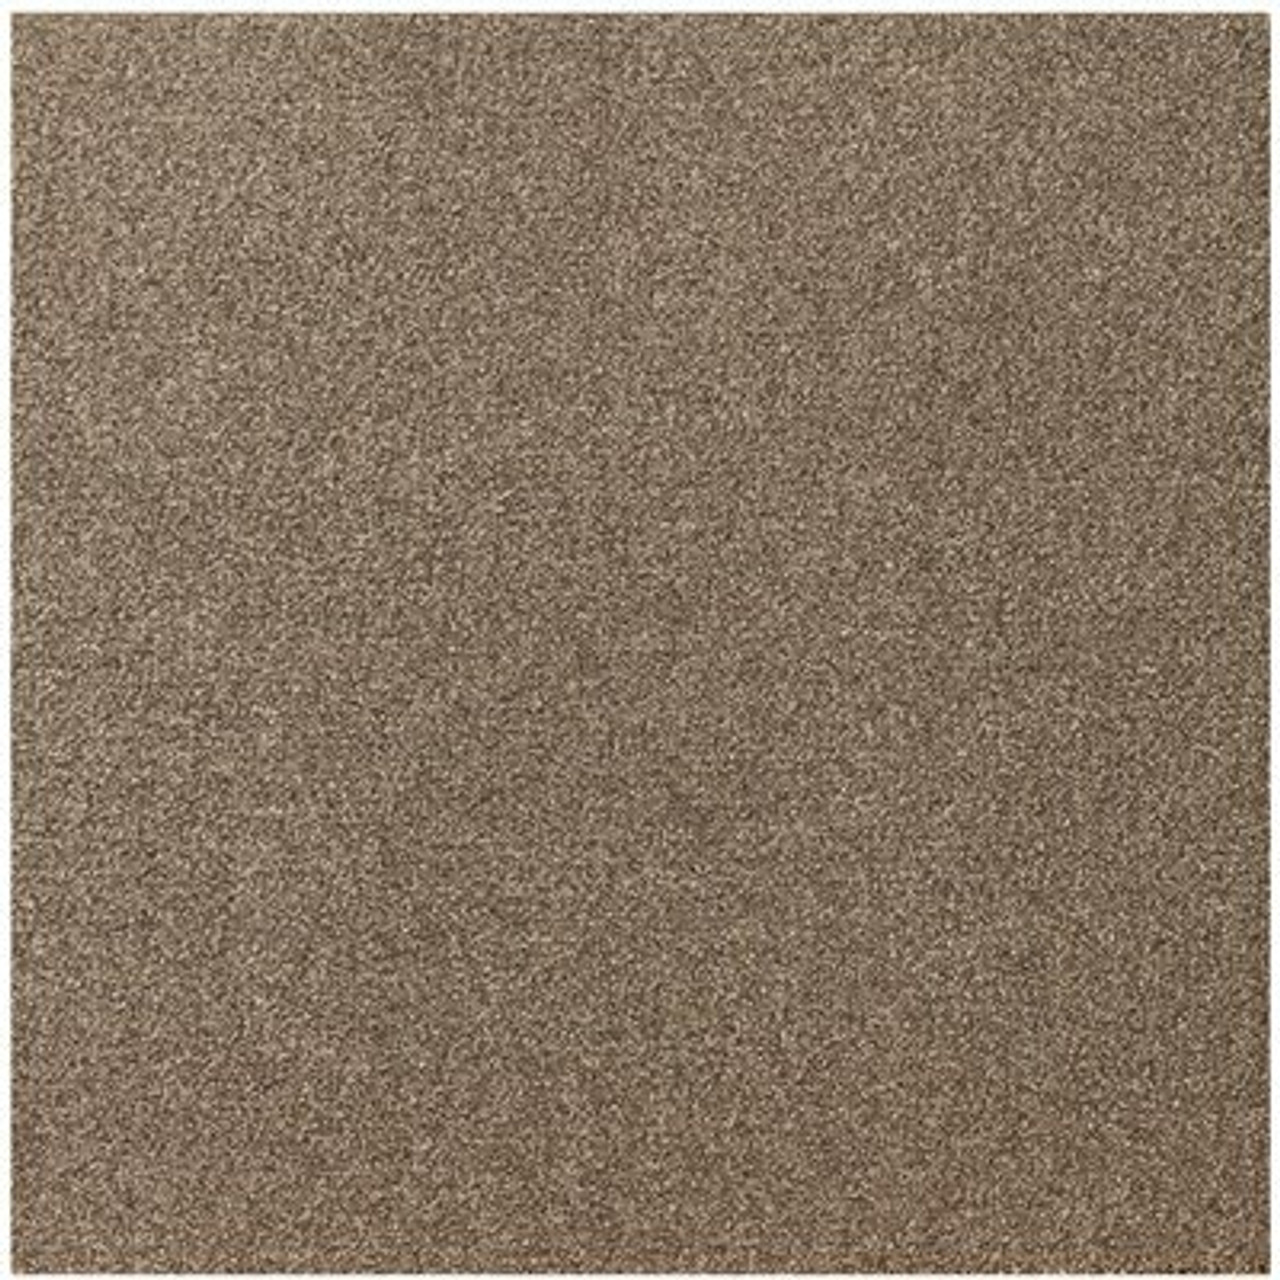 Dip Mohair Commercial/Residential 19.7 In. X 19.7 In. Adhesive Tab Carpet Tile Squares (4 Tiles/10.7 Sq Ft.)